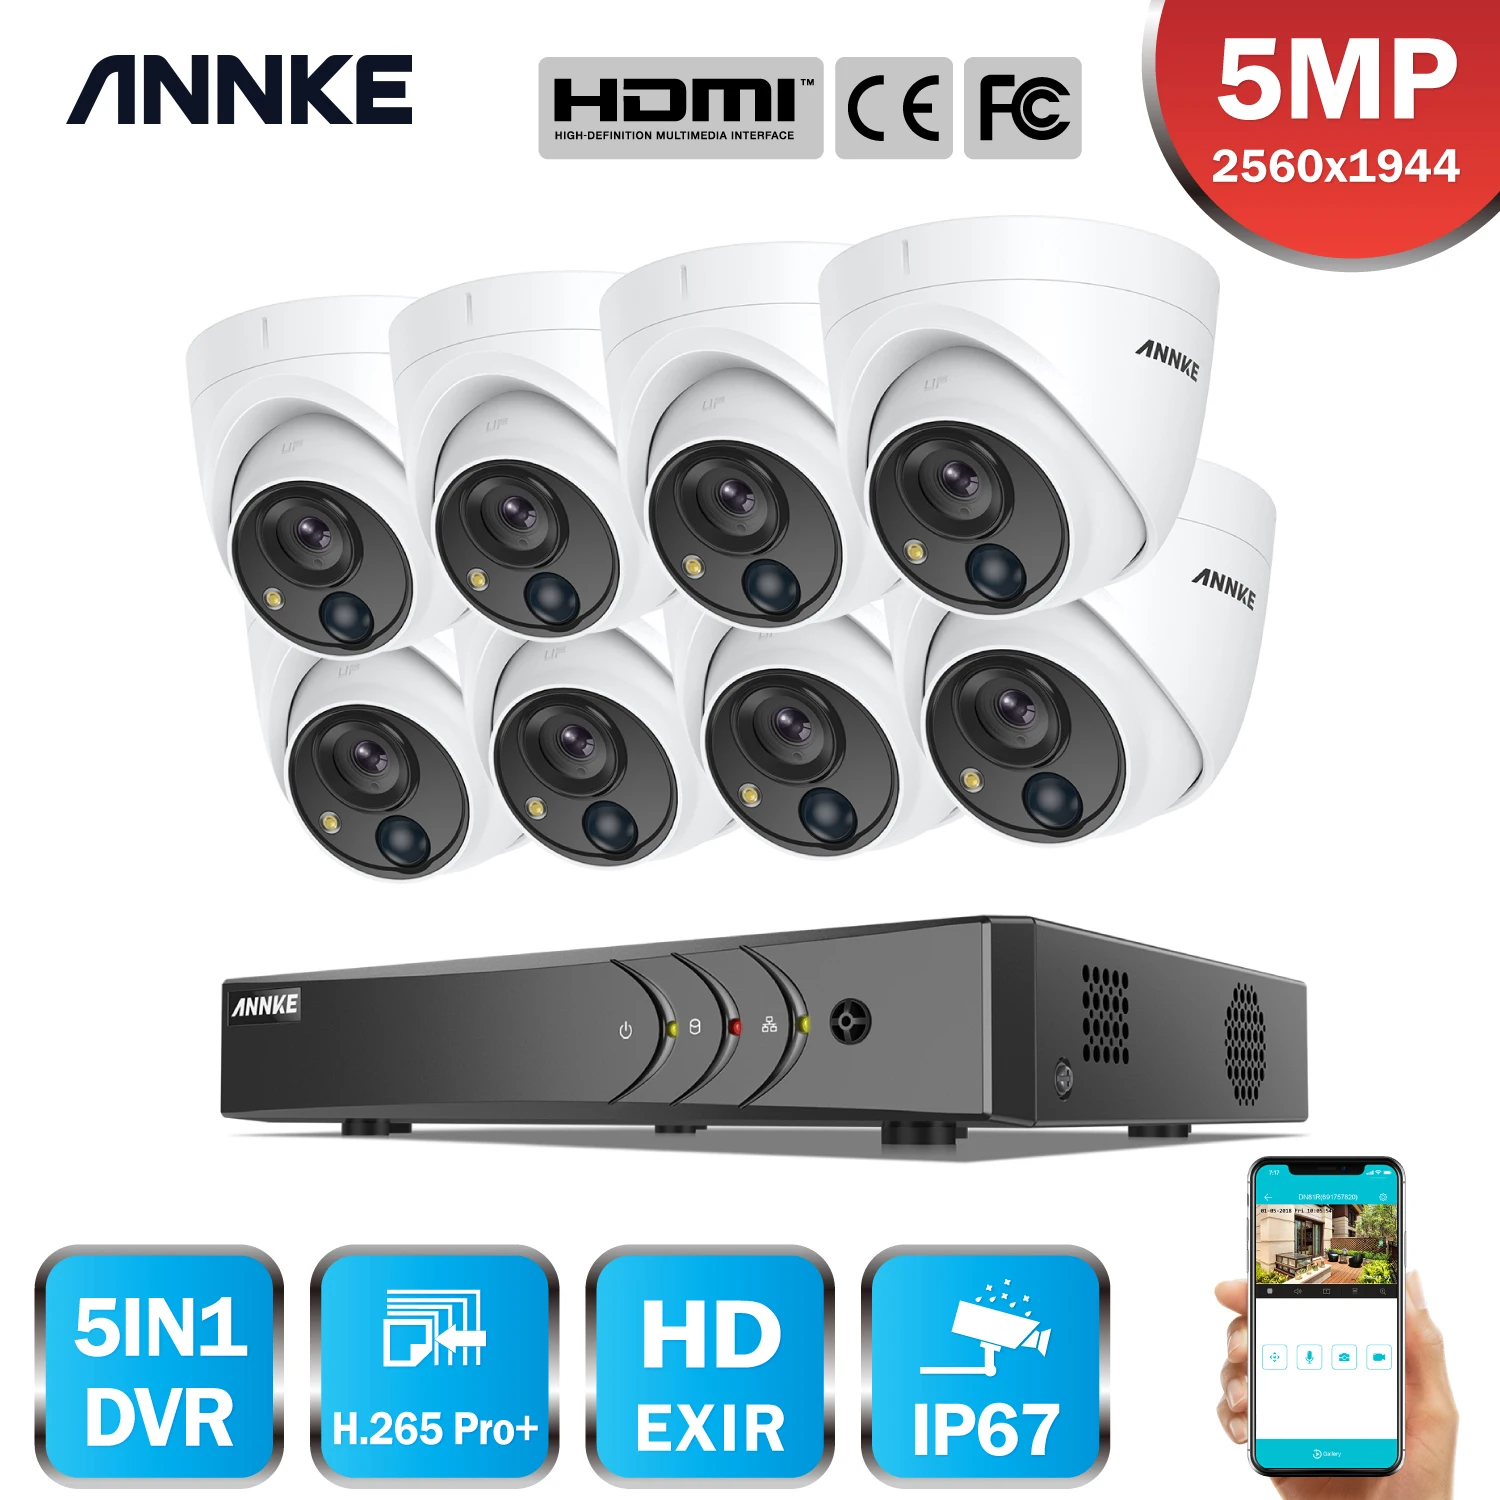 ANNKE 5MP Security Camera System H.265+ DVR Surveillance with 4X/8X 5MP PIR Outdoor Cameras IP67 Weatherproof Security Kit White